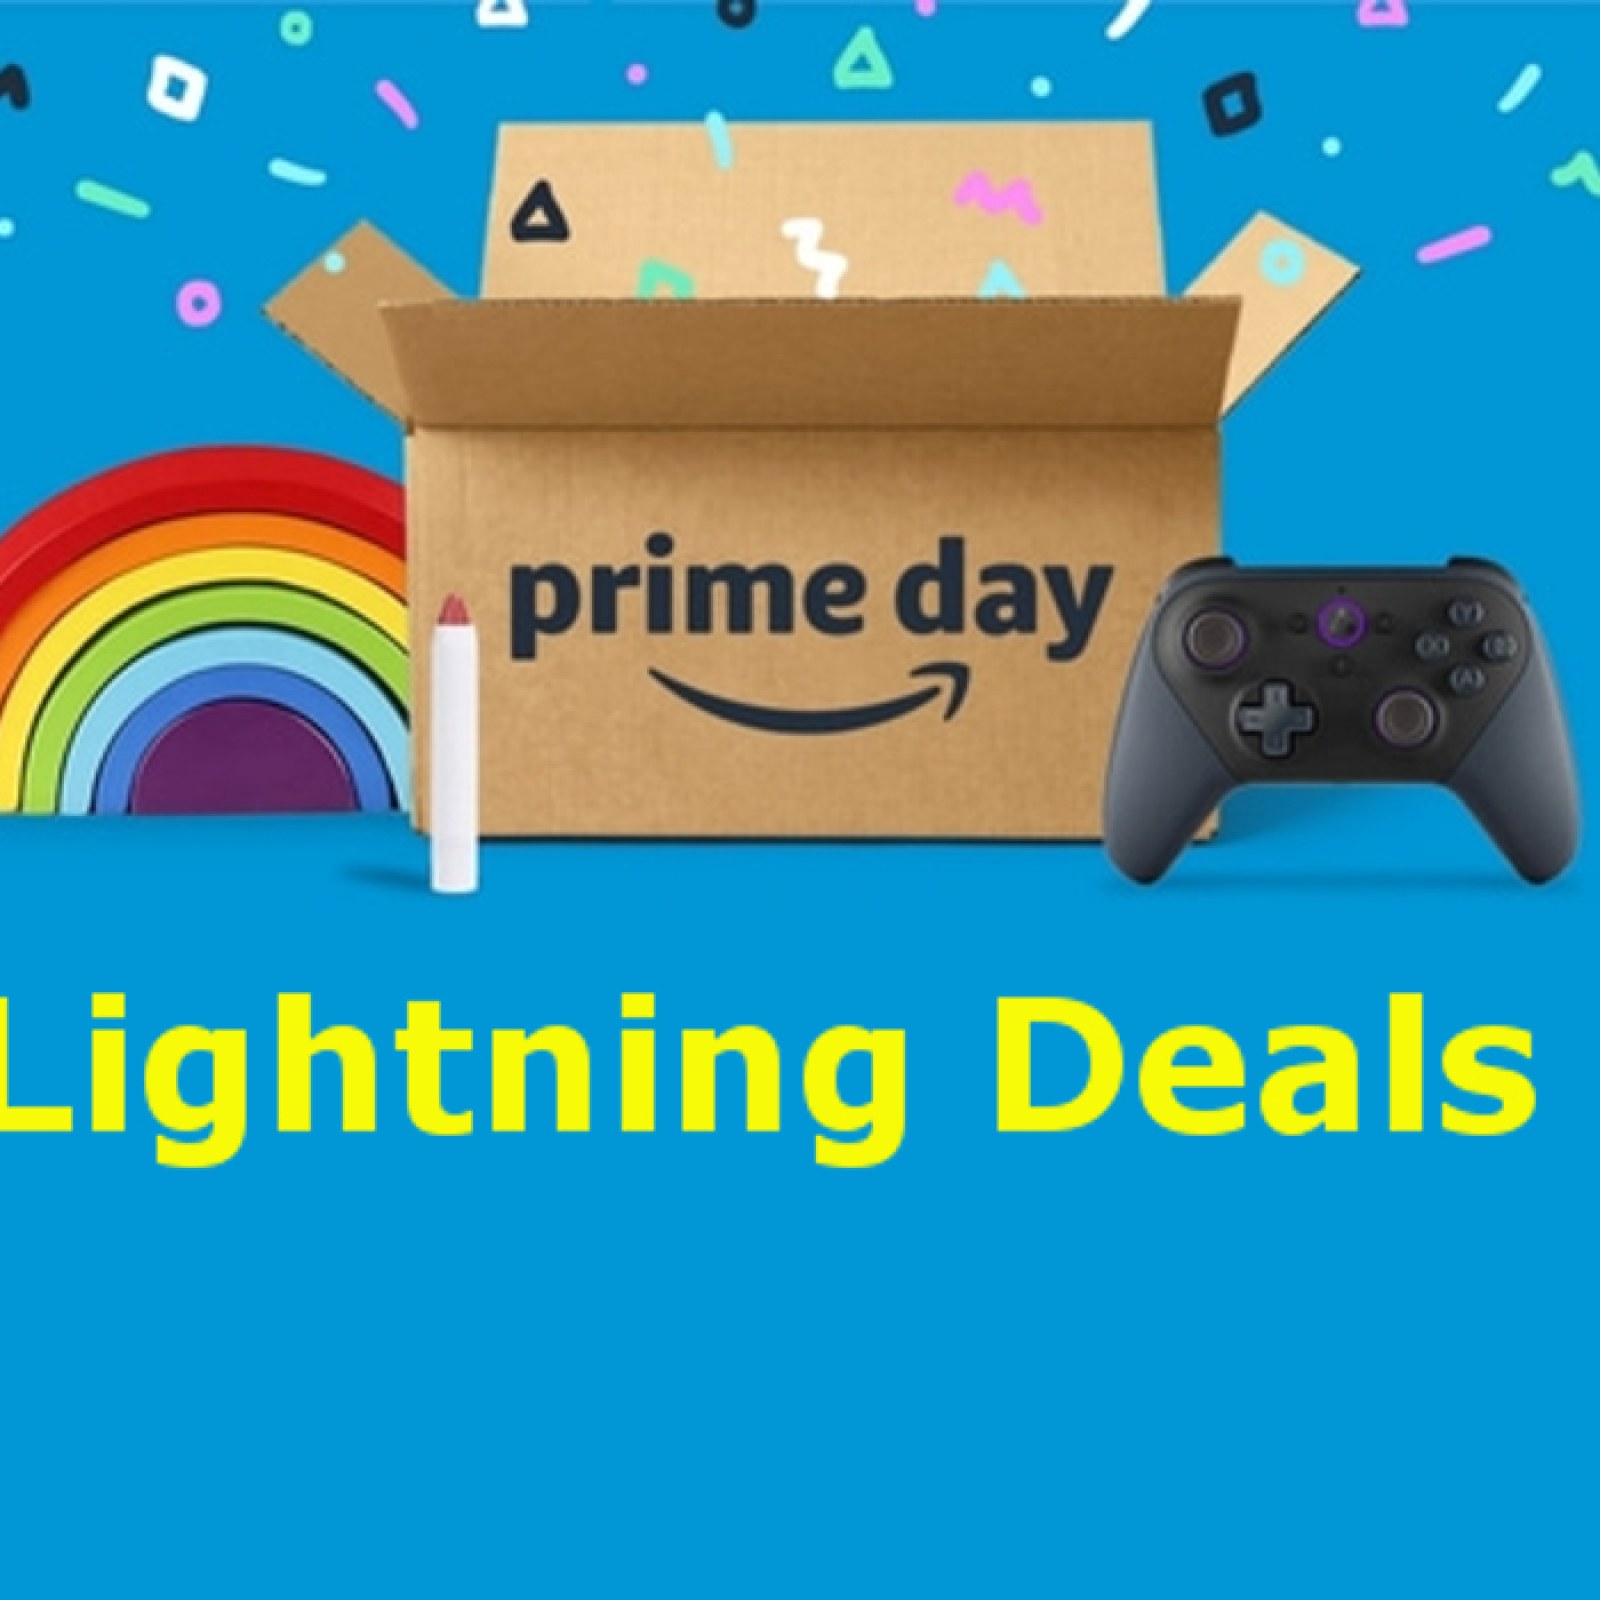 Deals Canada,Deal of The Day,Deals of The Day Prime Only,Daily Deals  Lightning Deals of Today